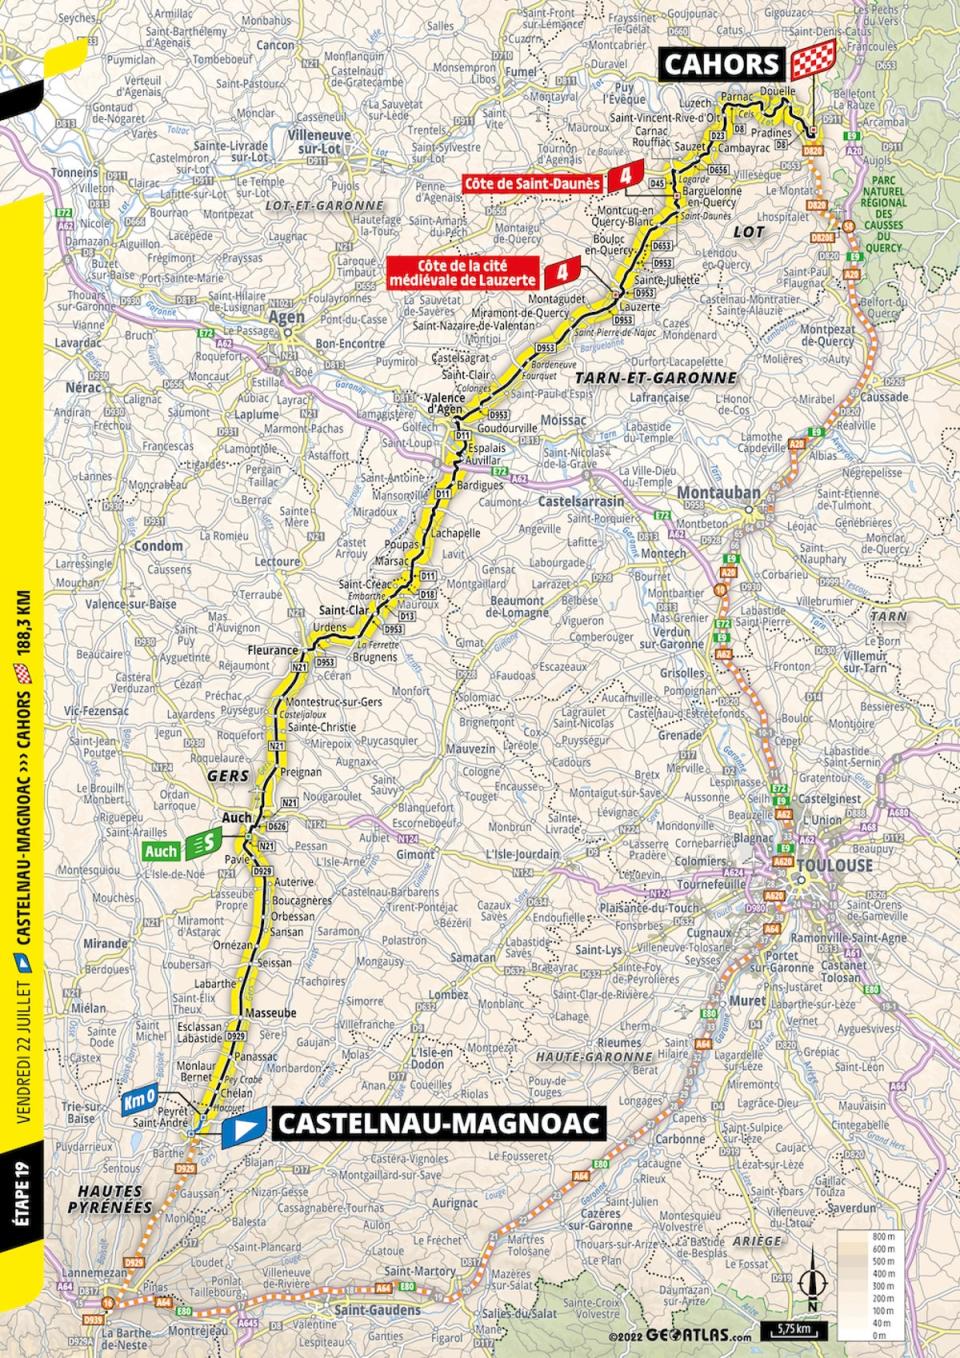 Tour de France 2022 stage 19 preview Route map and profile from